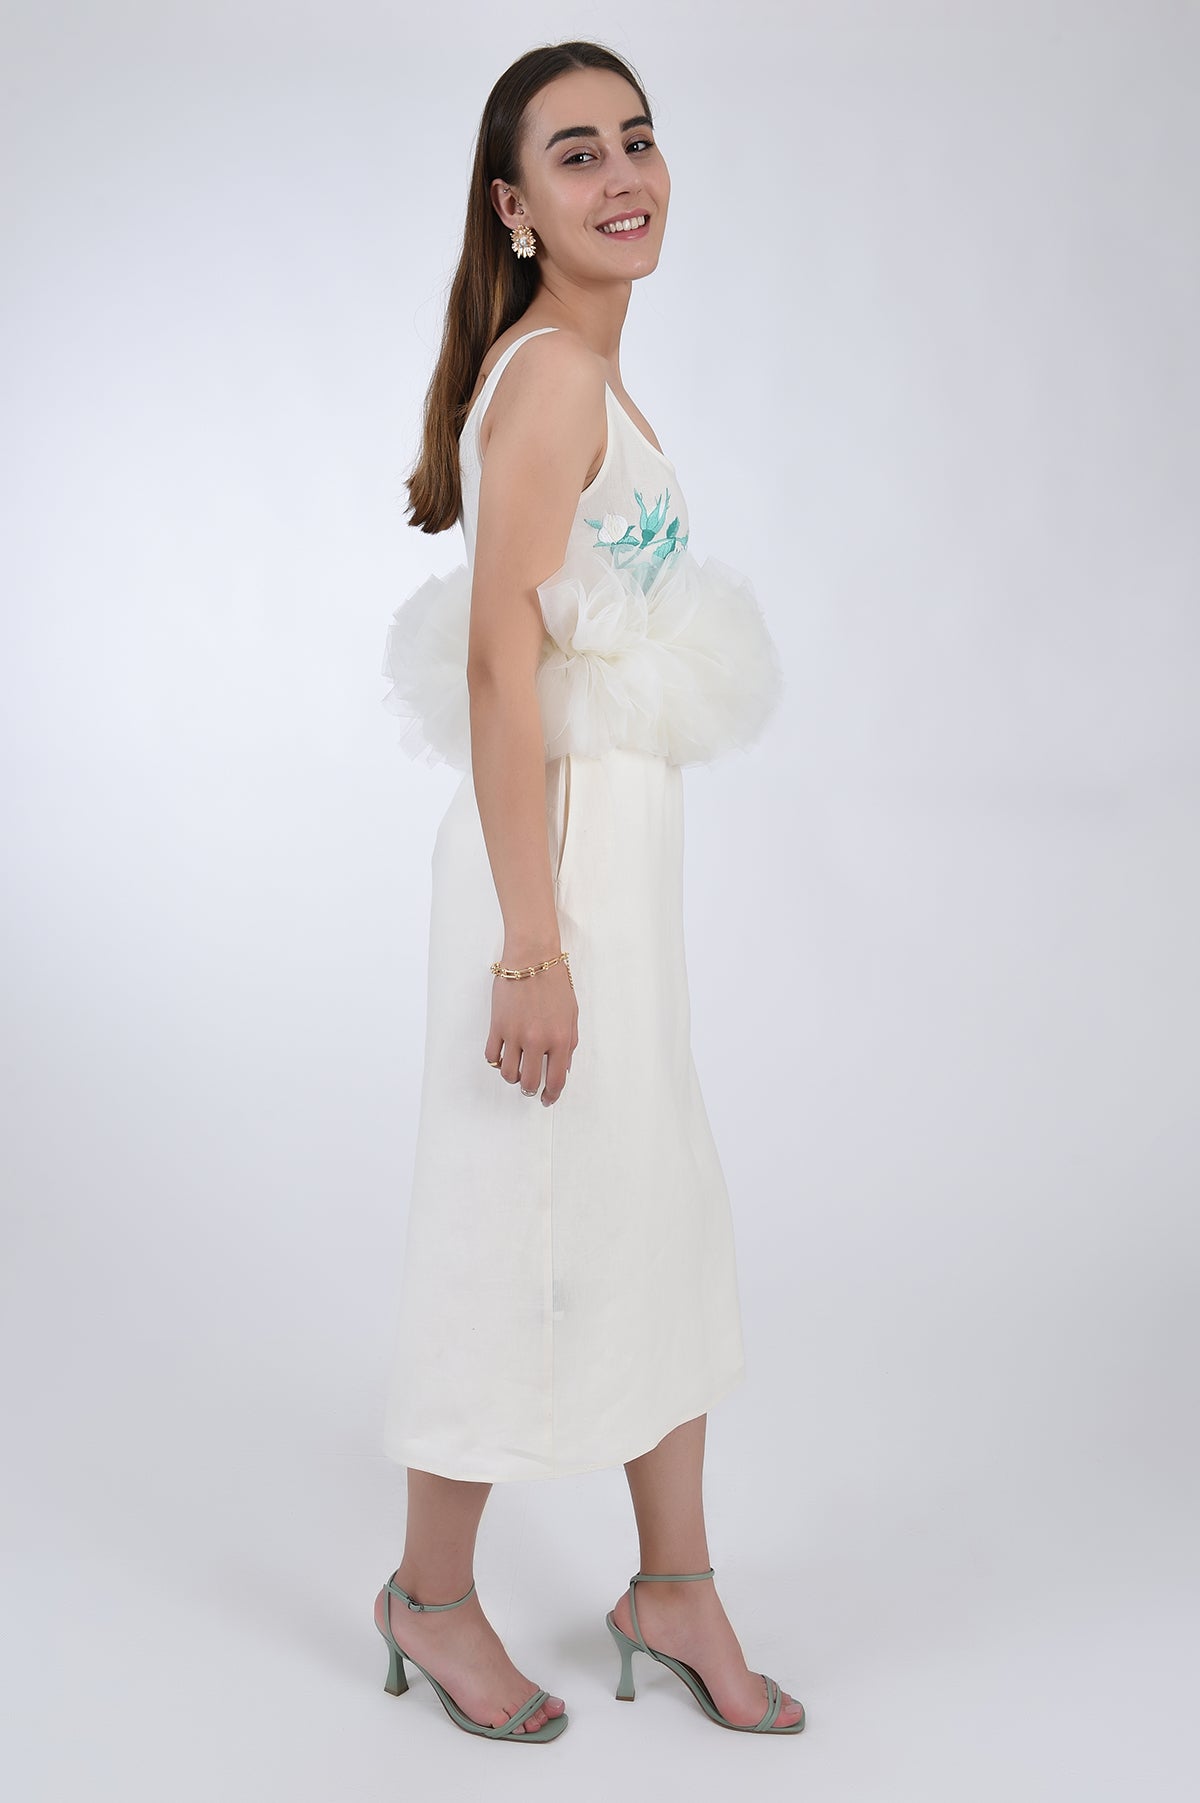 Fanm Mon Citra Linen & Tulle Midi Dress, side view. Featuring embroidery detail at the chest, and tulling at the waist.  